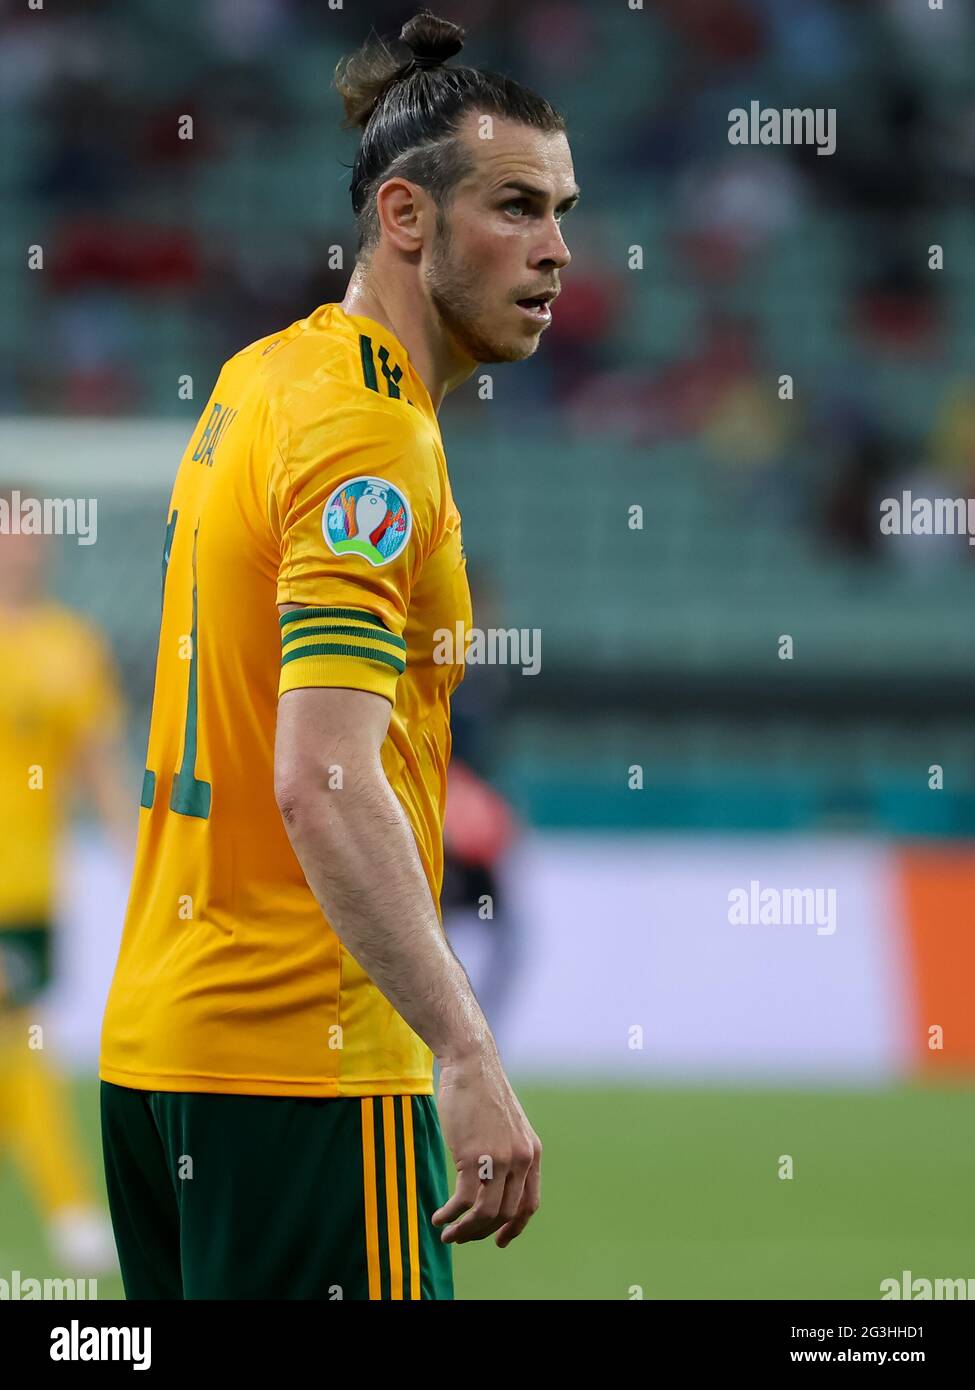 Wales' Gareth Bale during the UEFA Euro 2020 Group A match at the Baku Olympic Stadium in Azerbaijan. Picture date: Wednesday June 16, 2021. Stock Photo